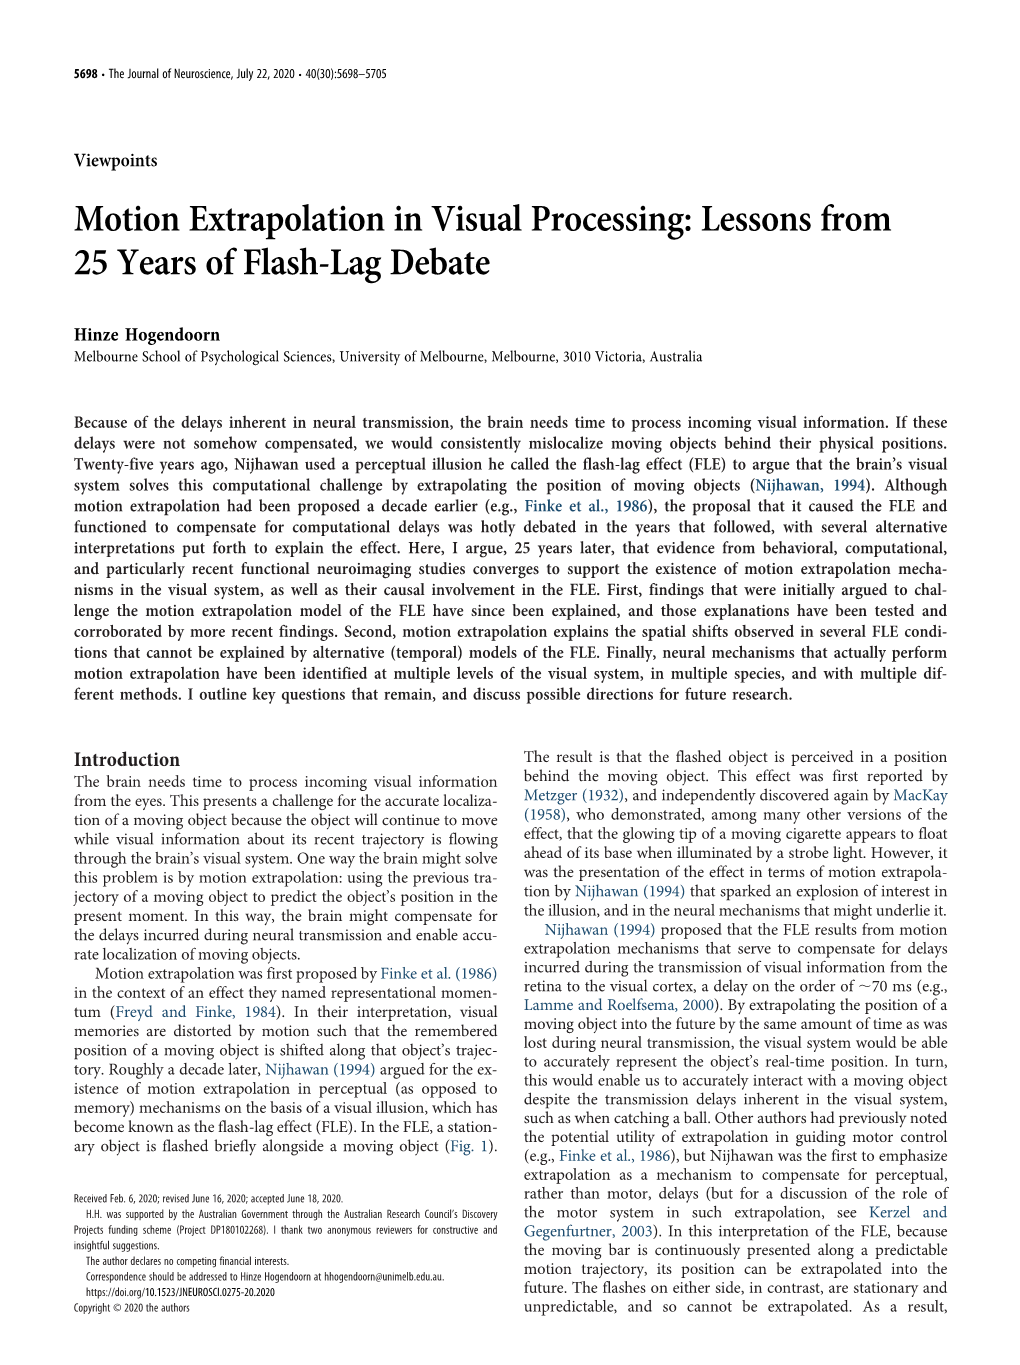 Motion Extrapolation in Visual Processing: Lessons from 25 Years of Flash-Lag Debate